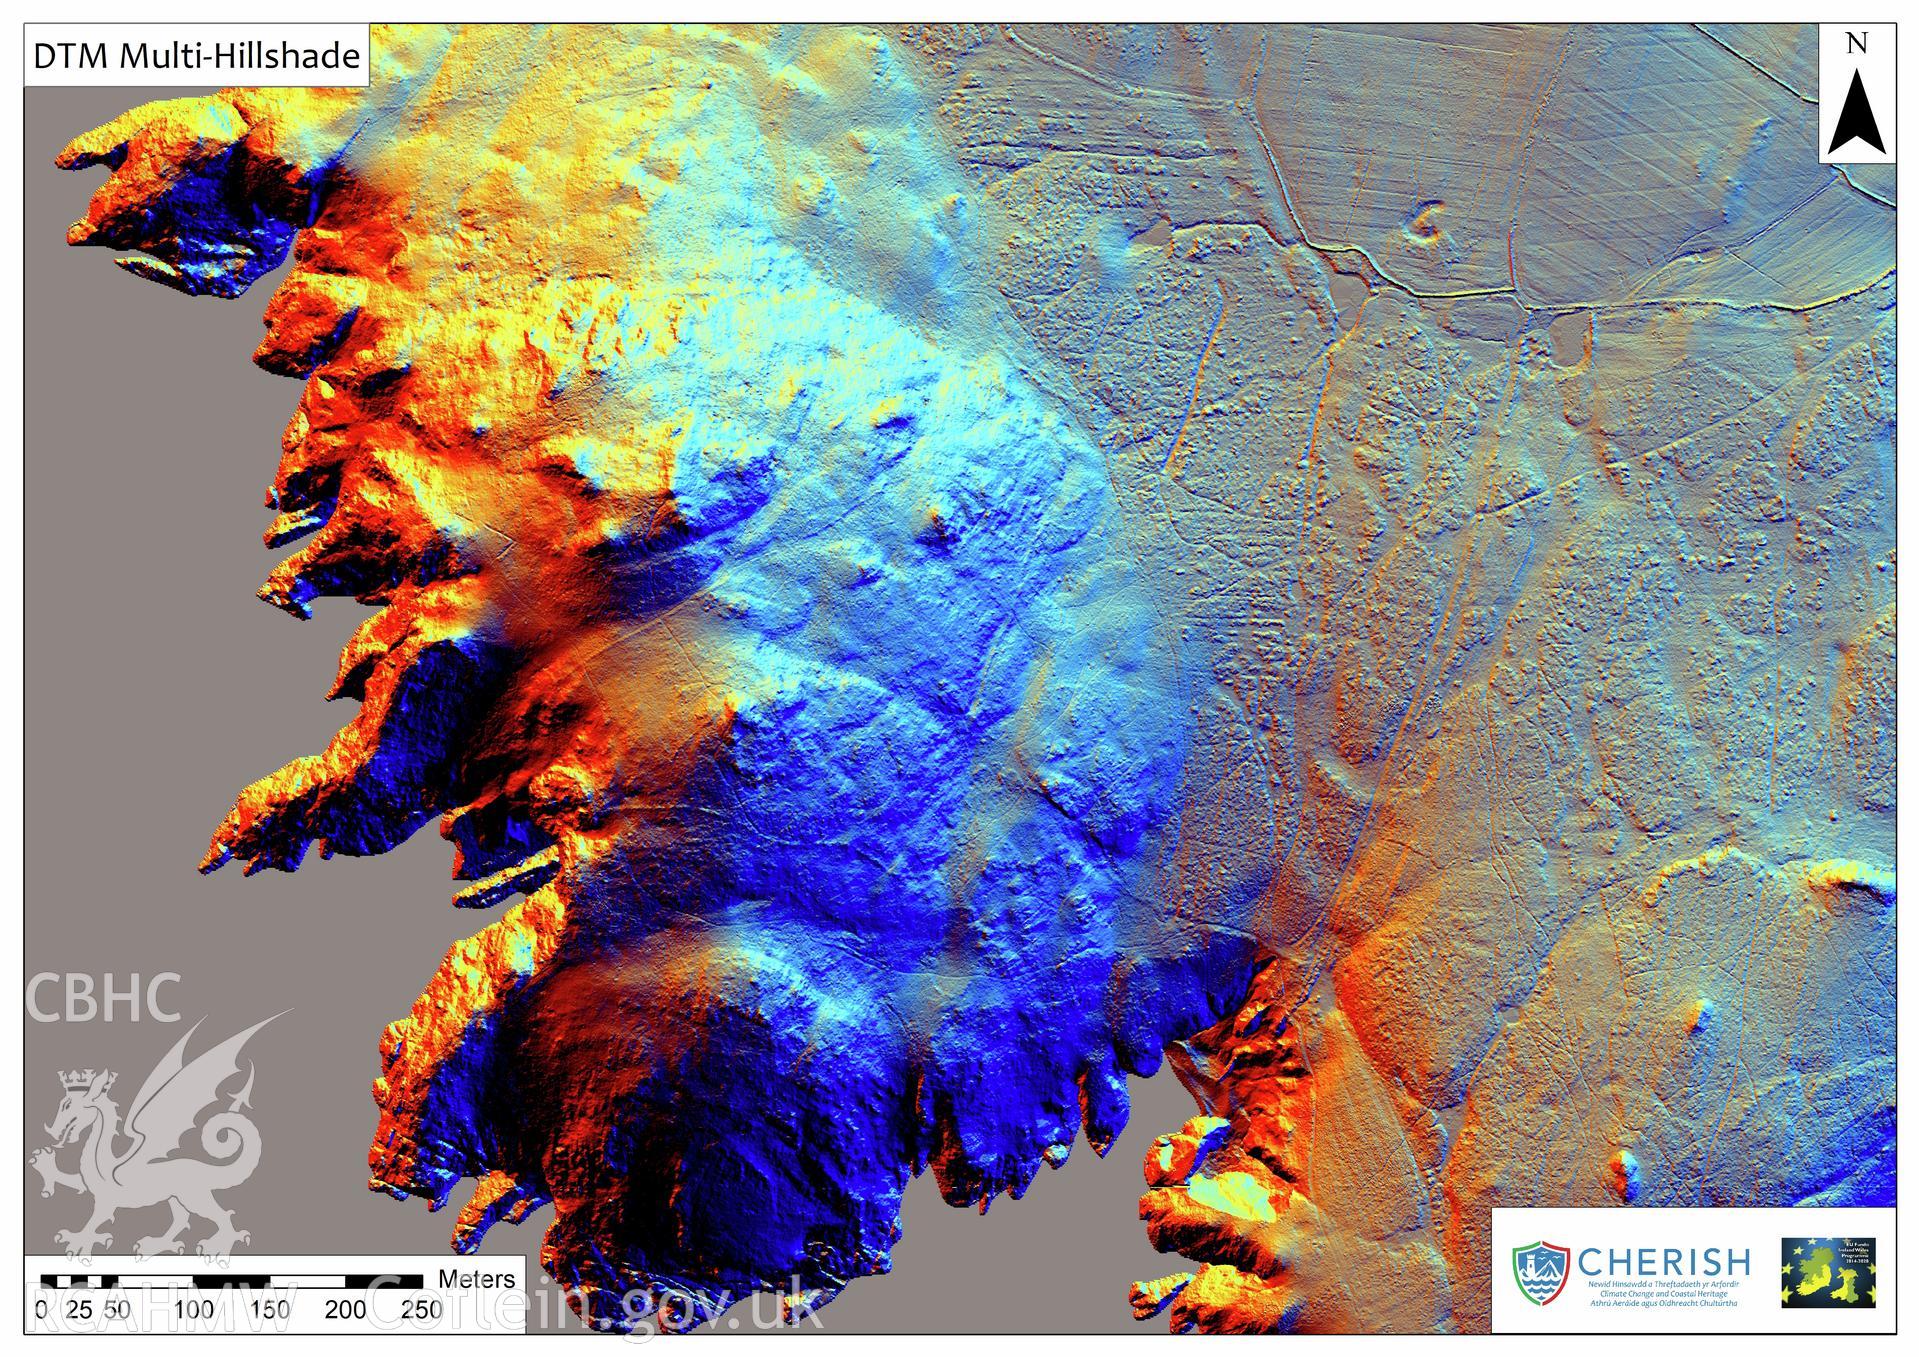 Ramsey Island. Airborne laser scanning (LiDAR) commissioned by the CHERISH Project 2017-2021, flown by Bluesky International LTD at low tide on 24th February 2017. View showing Digital Terrain Model (DTM) of Carn Llundain field systems with multi-hill shading.